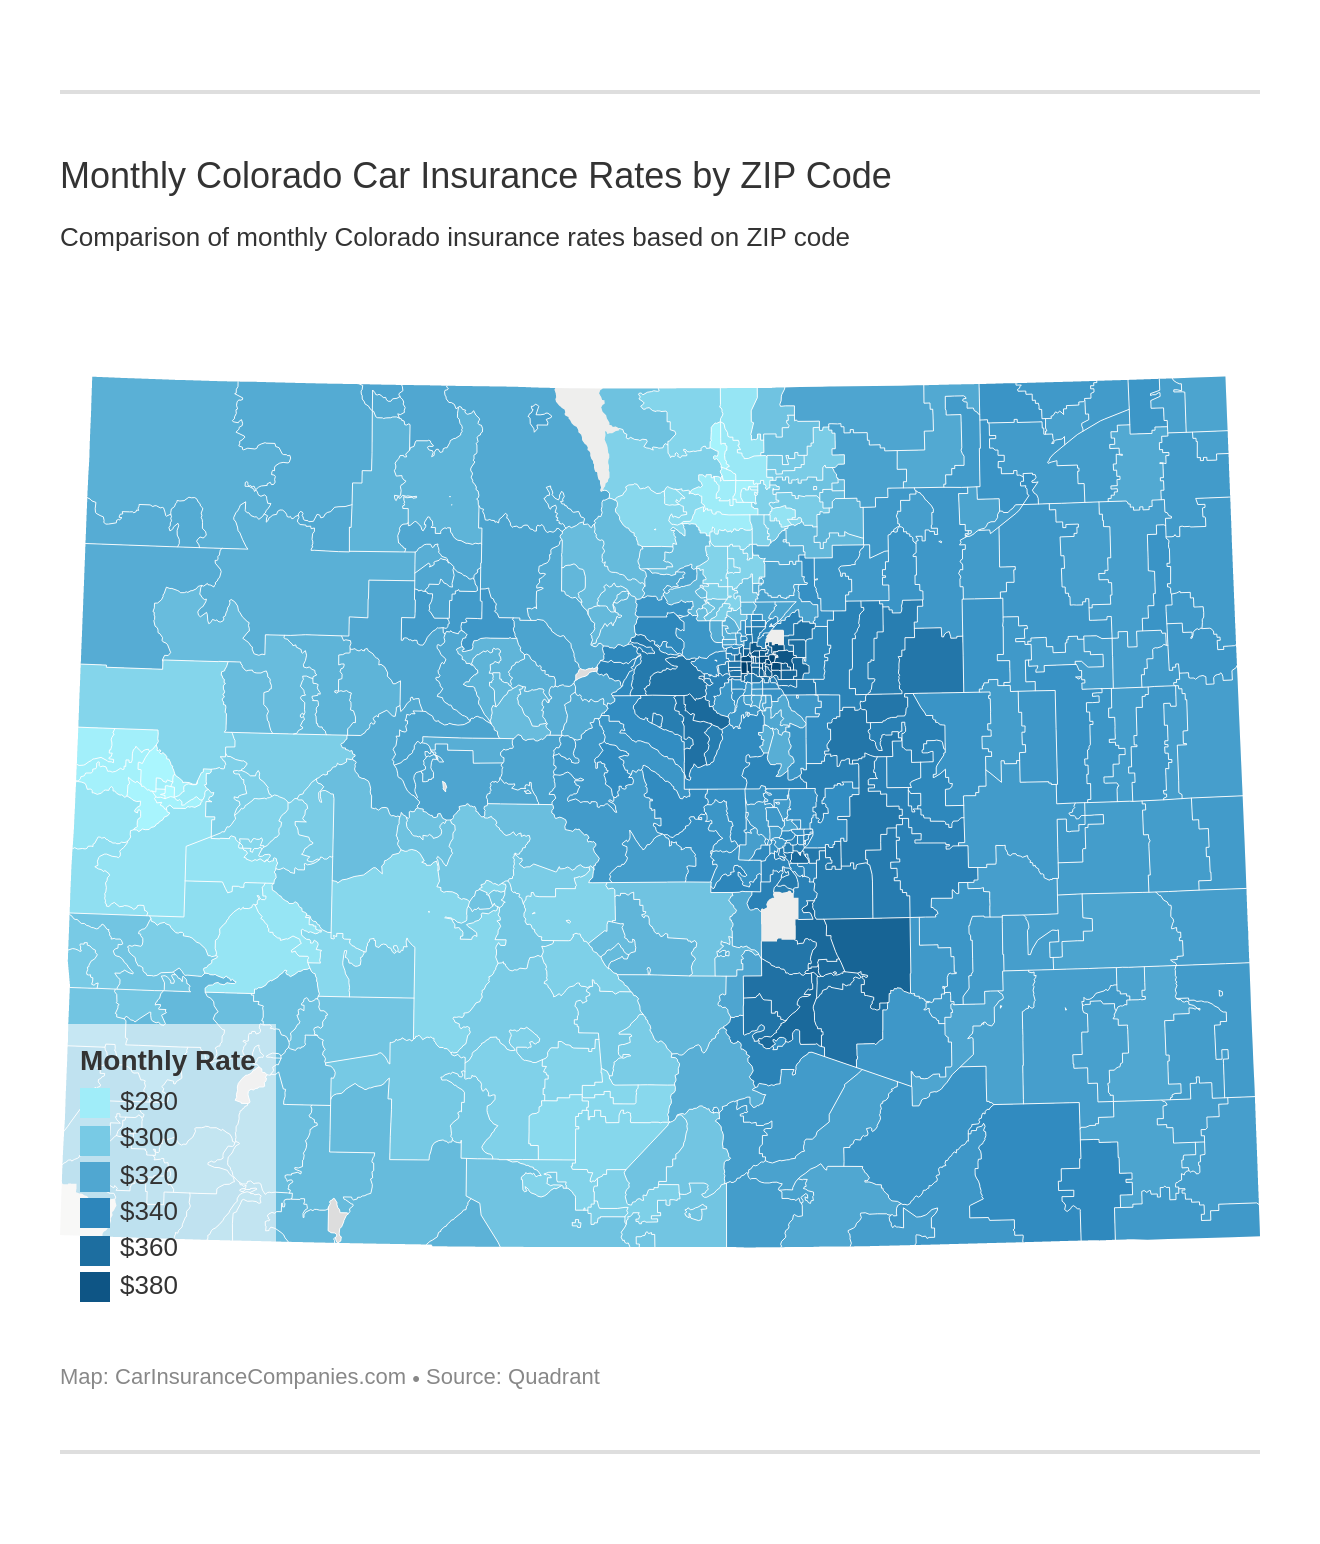 Monthly Colorado Car Insurance Rates by ZIP Code